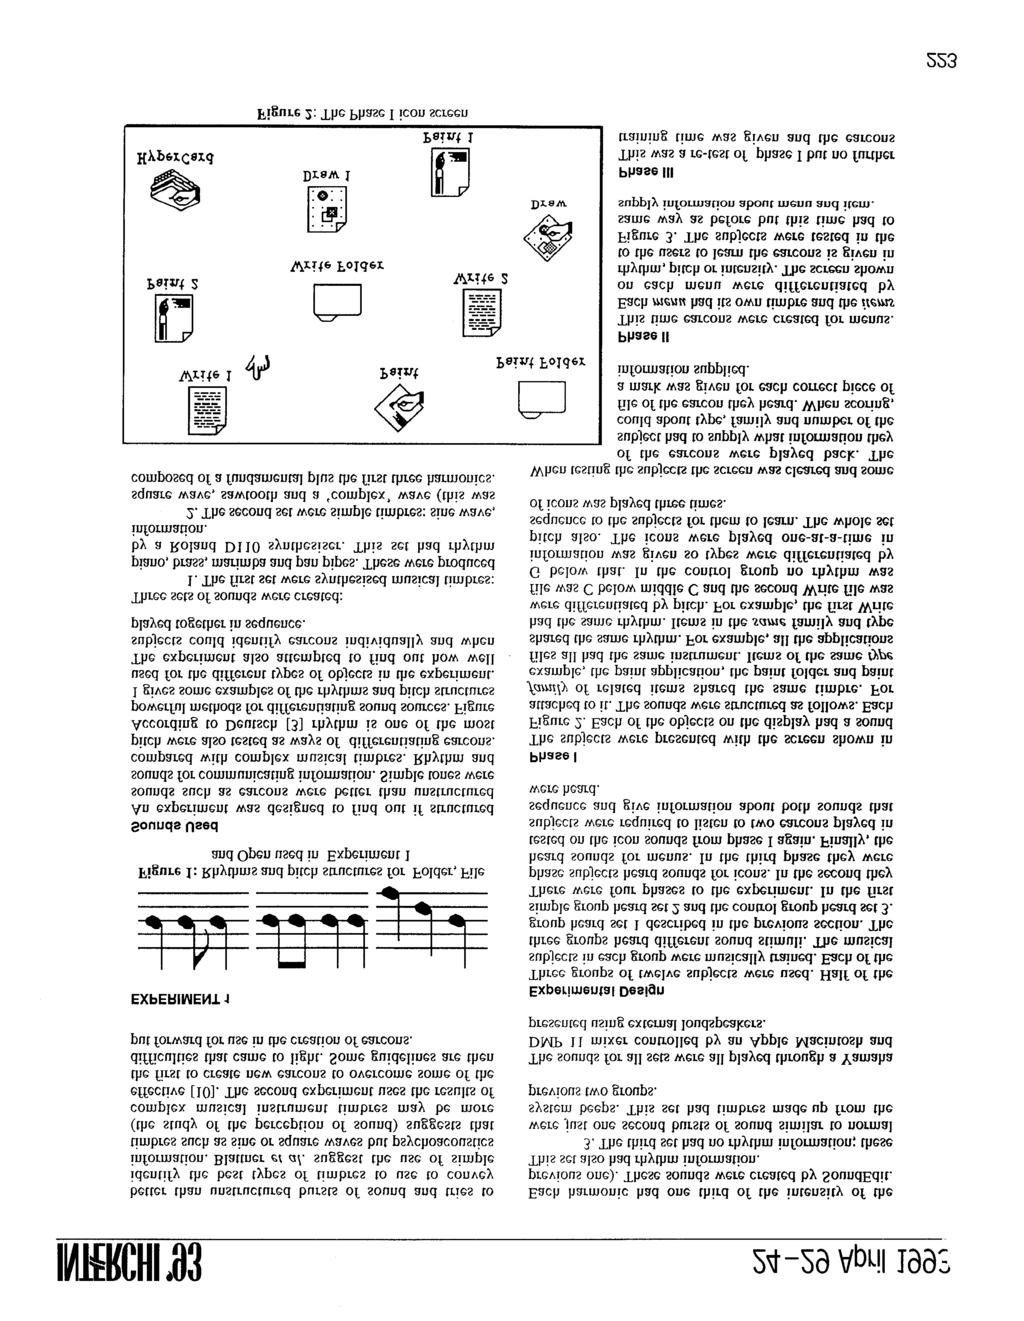 lntfrchr93 24-29 April199? better than unstructured bursts of sound and tries to identify the best types of timbres to use to convey information. Blattner et al.